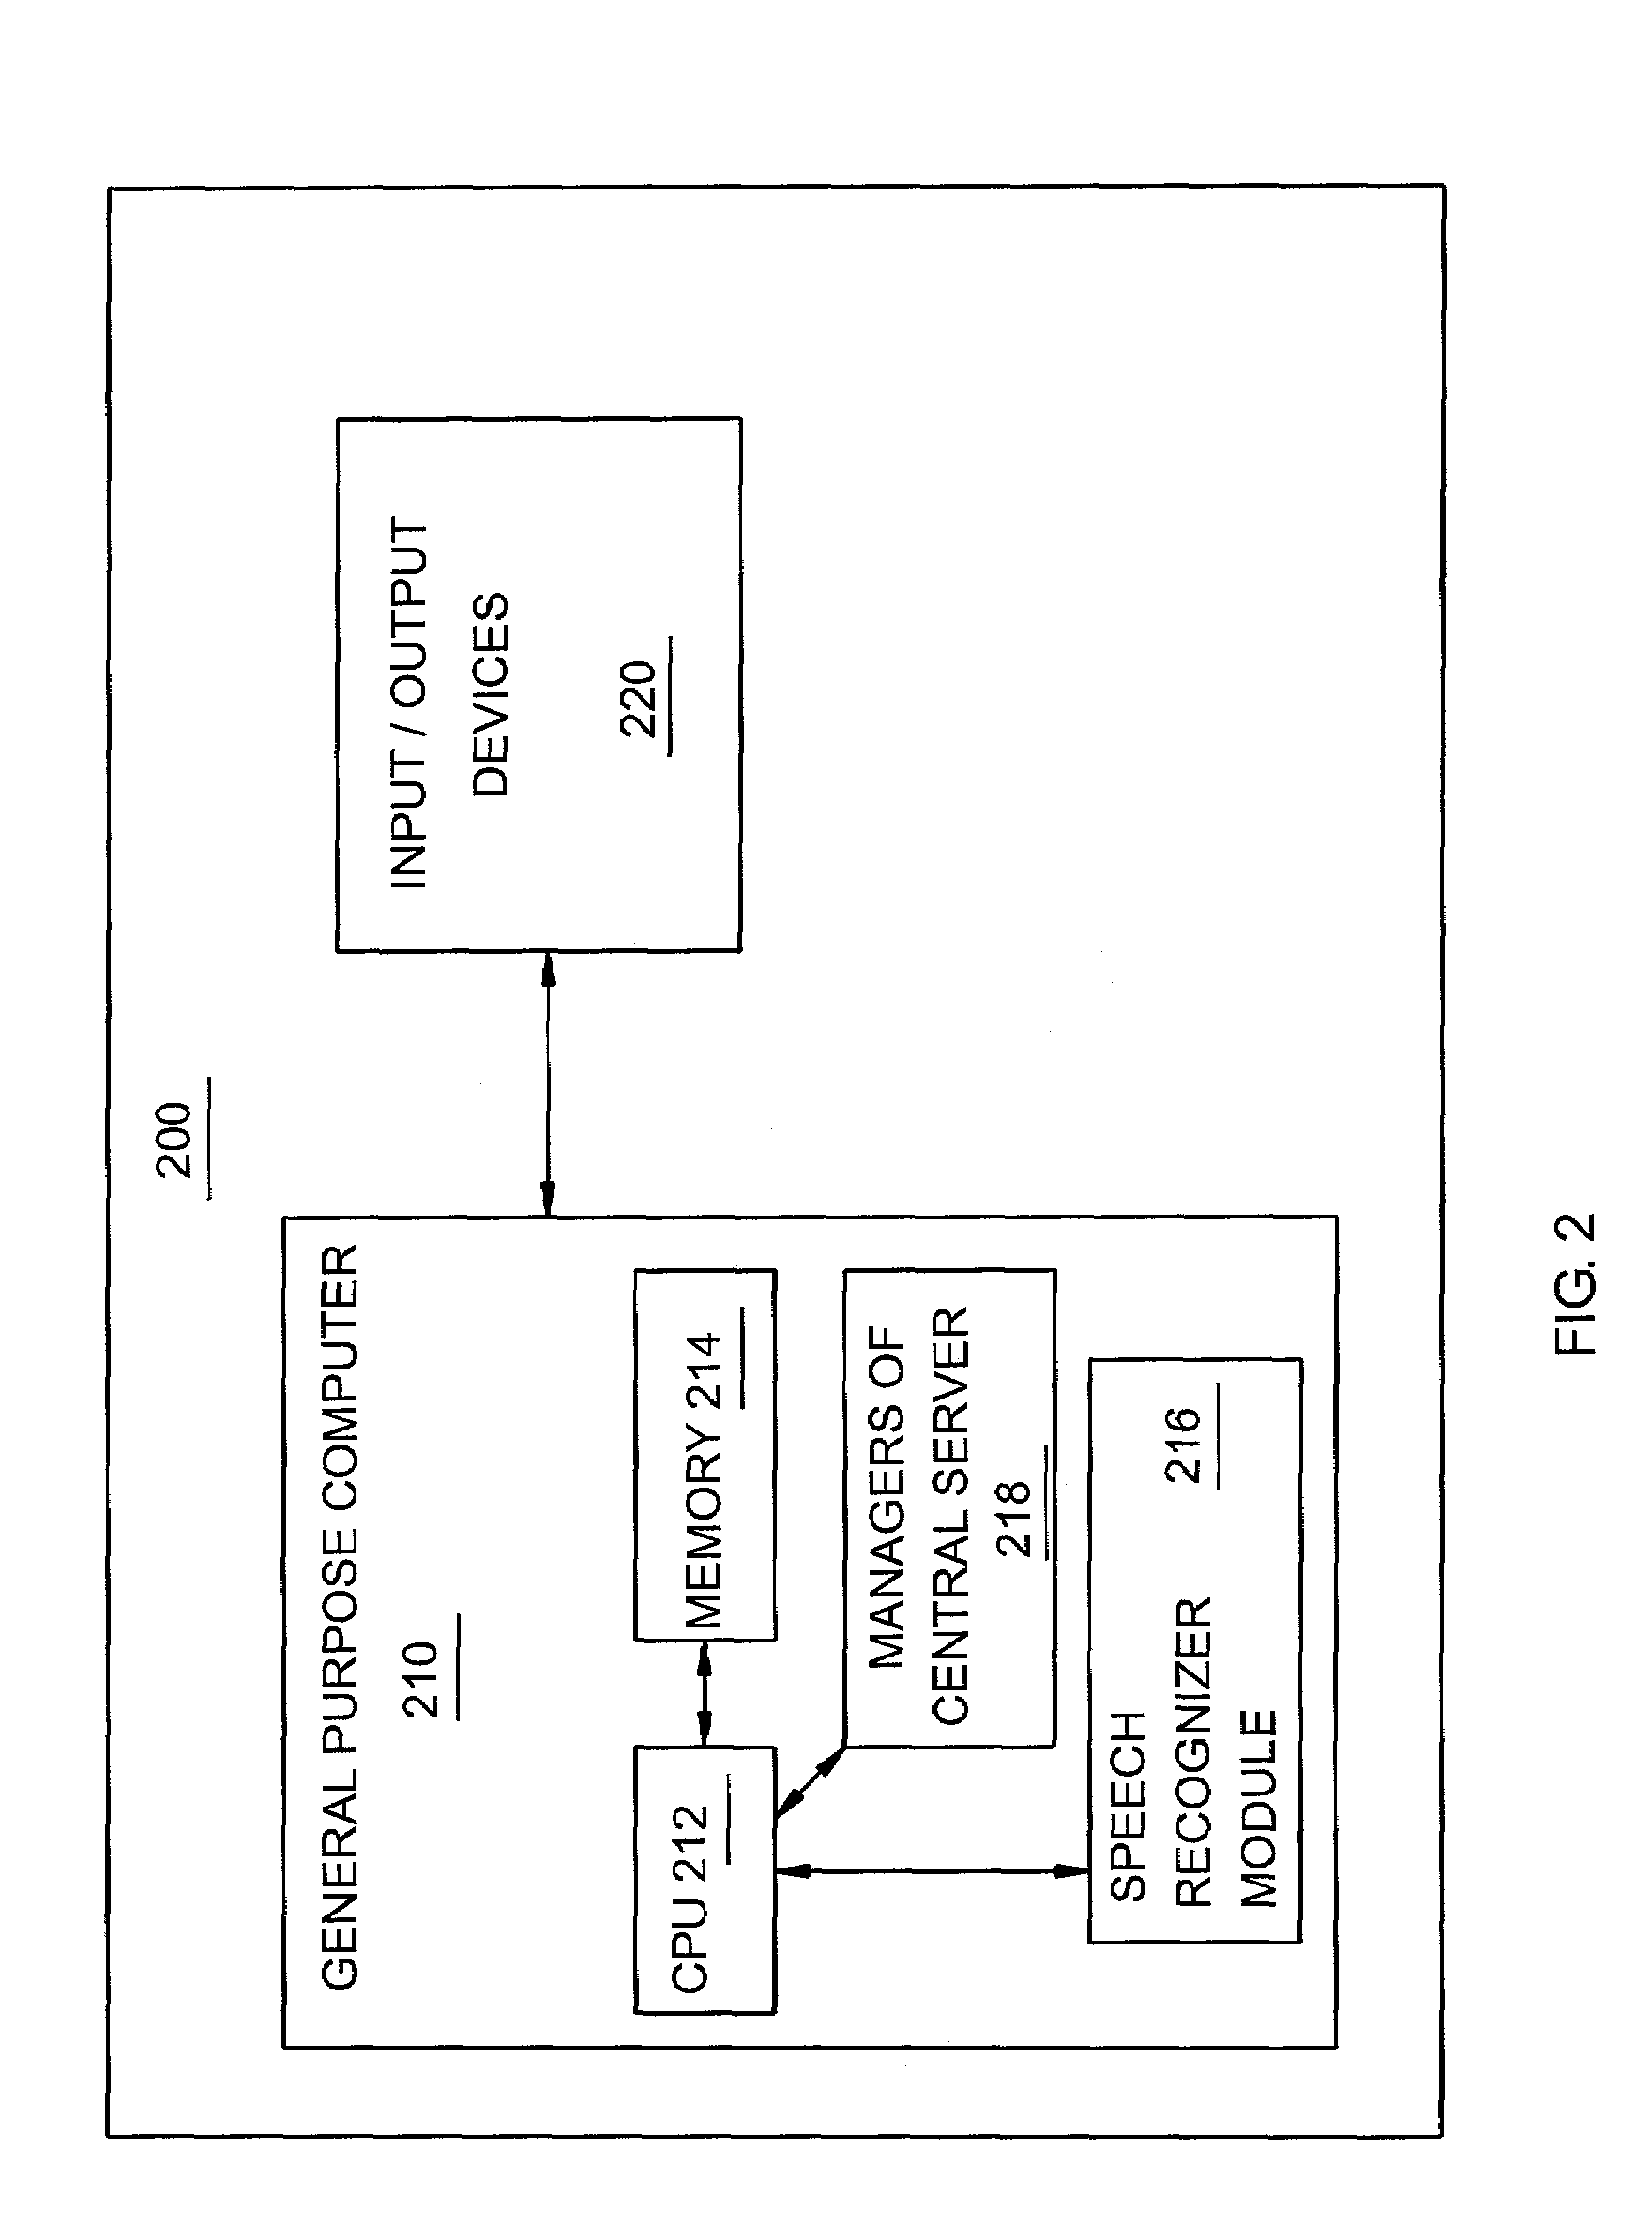 Method and apparatus for providing speech-driven routing between spoken language applications